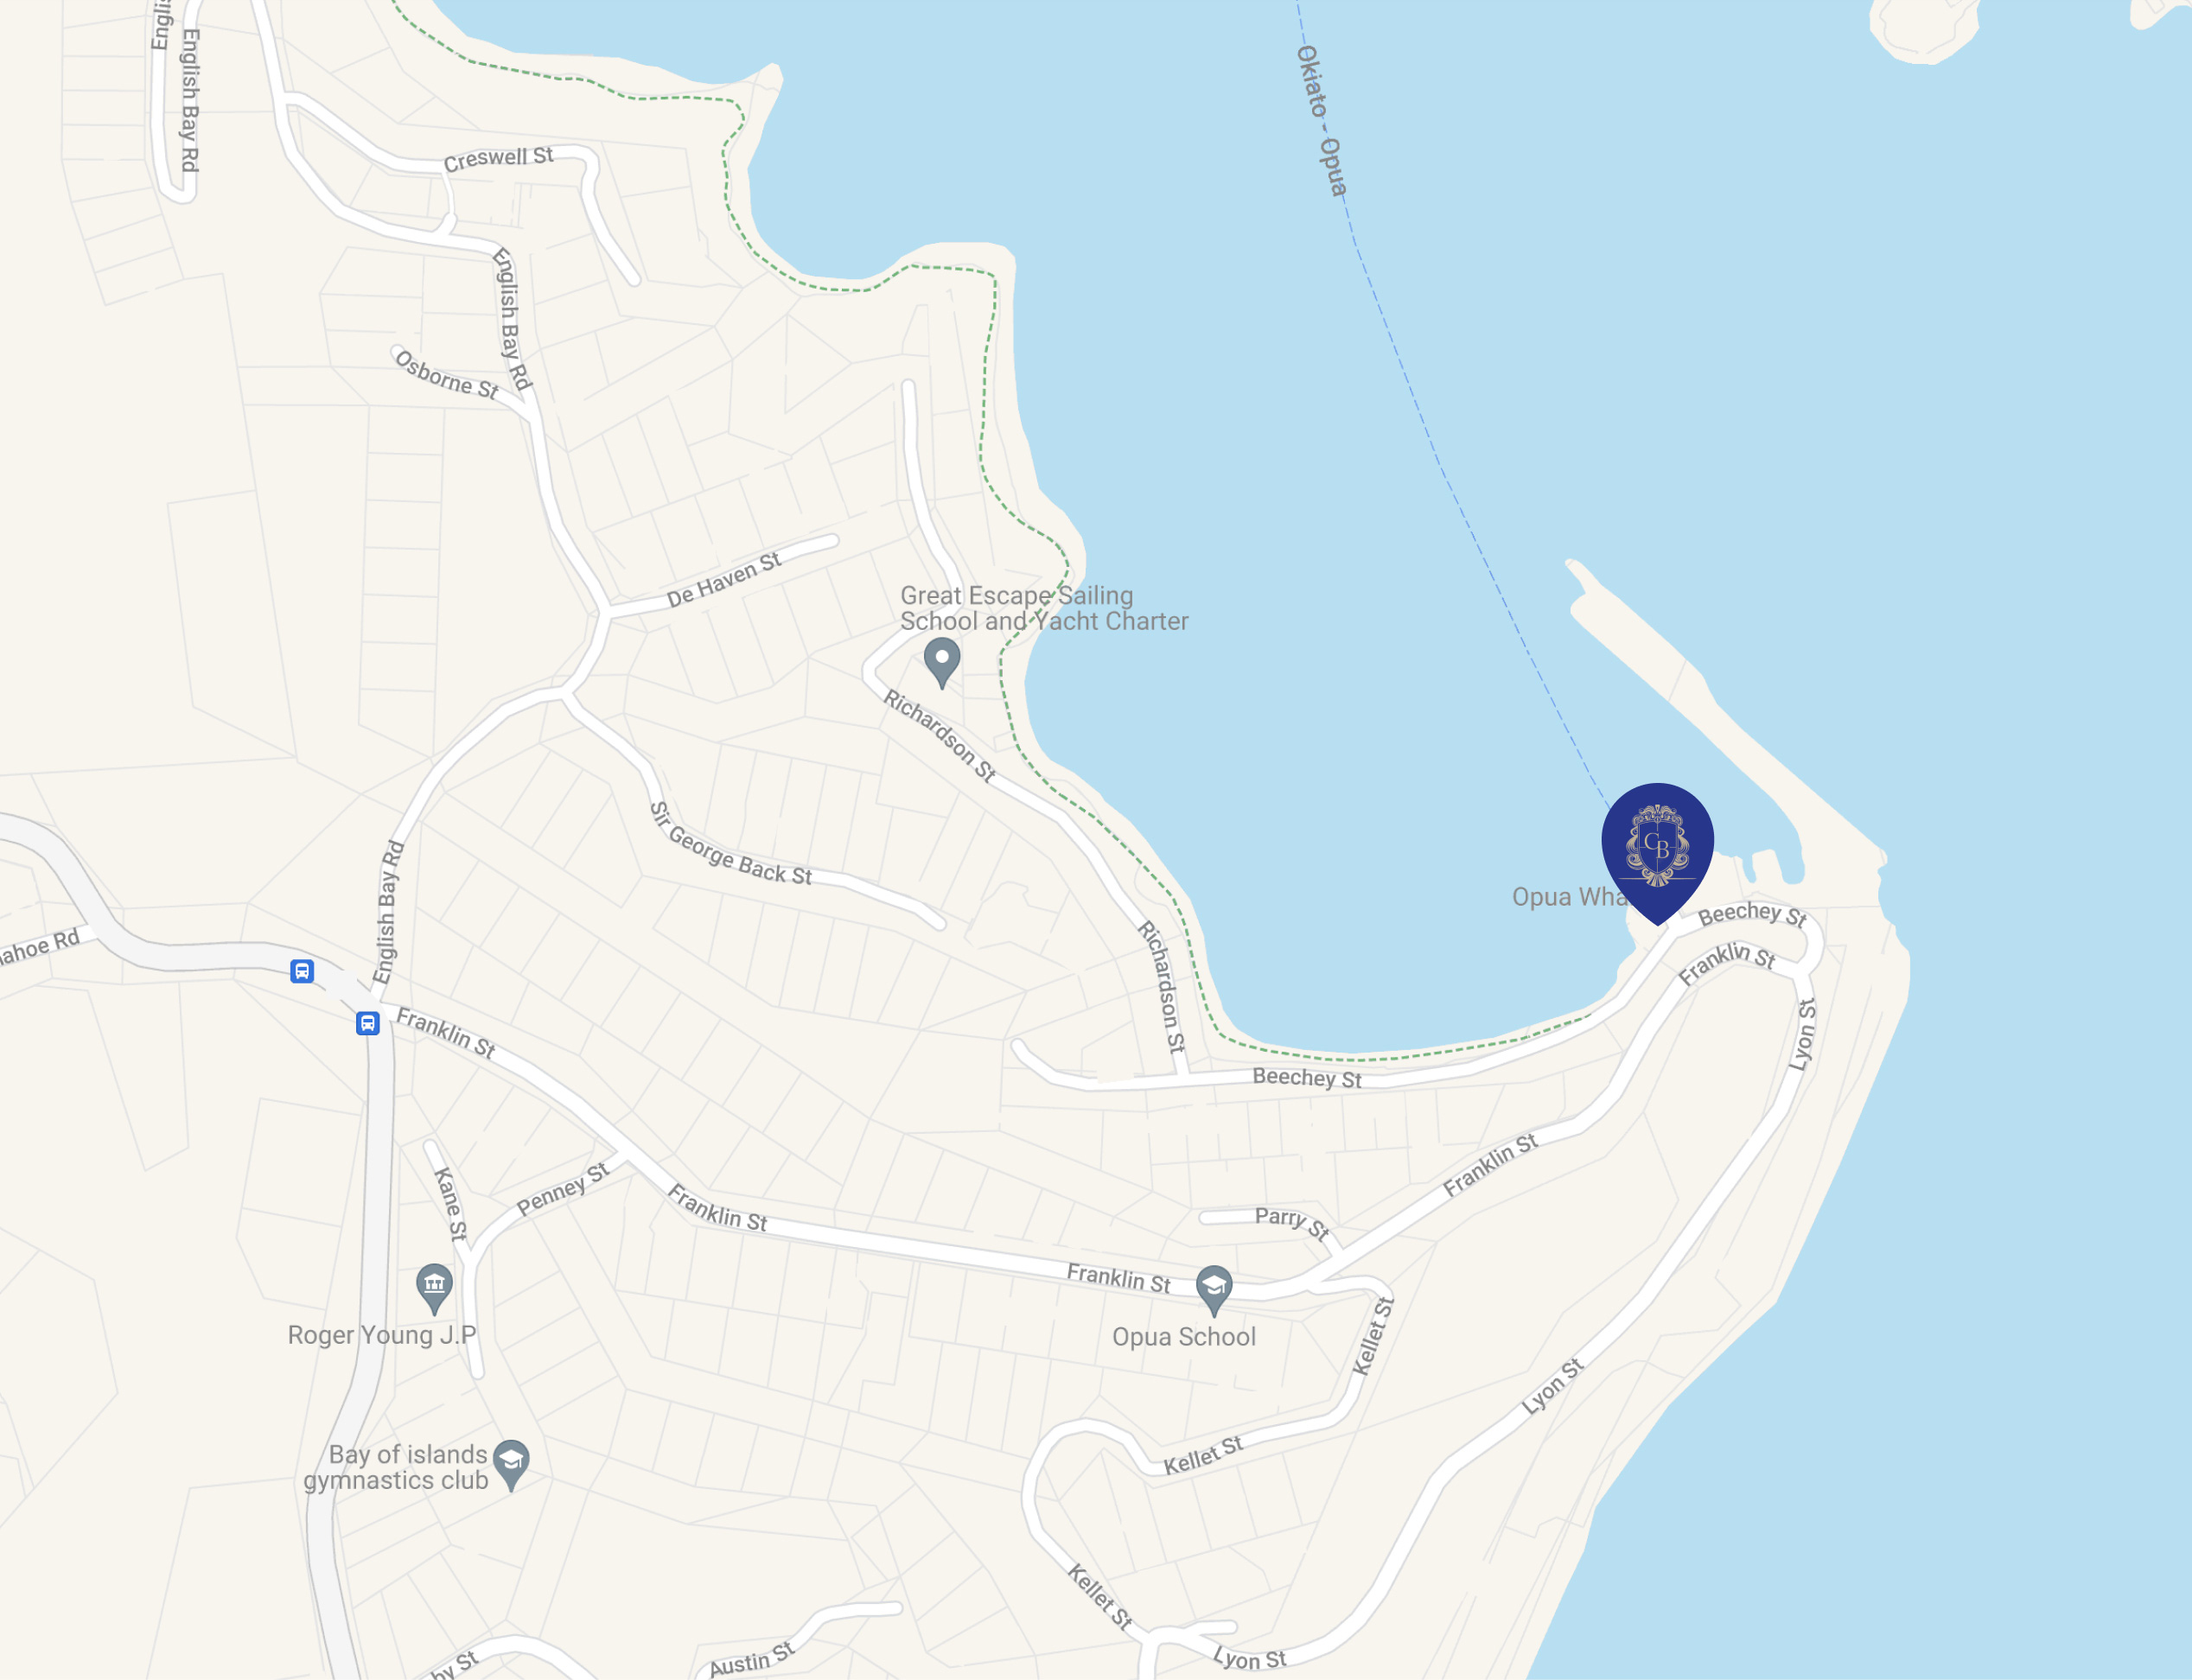 Map of The Boathouse Accomodation, at waters edge near Opua Wharf in Northland.